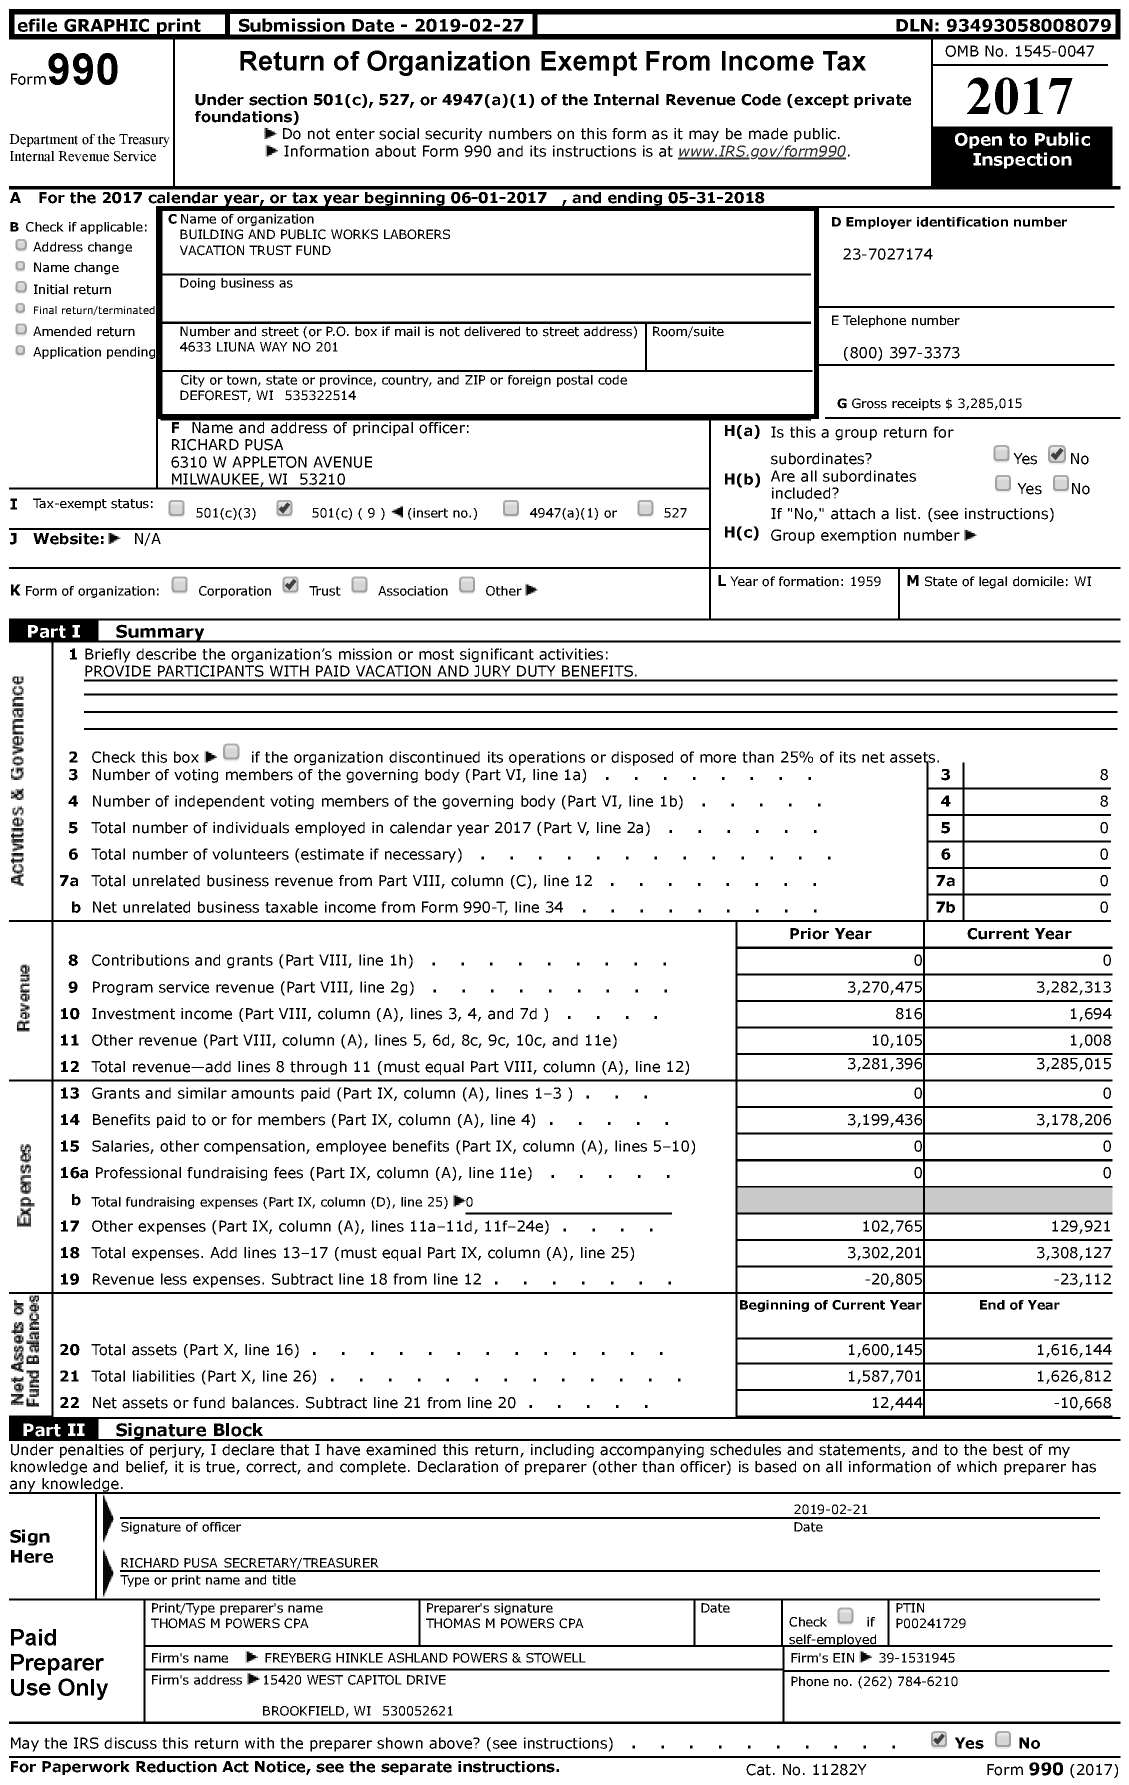 Image of first page of 2017 Form 990 for Building and Public Works Laborers Vacation Trust Fund